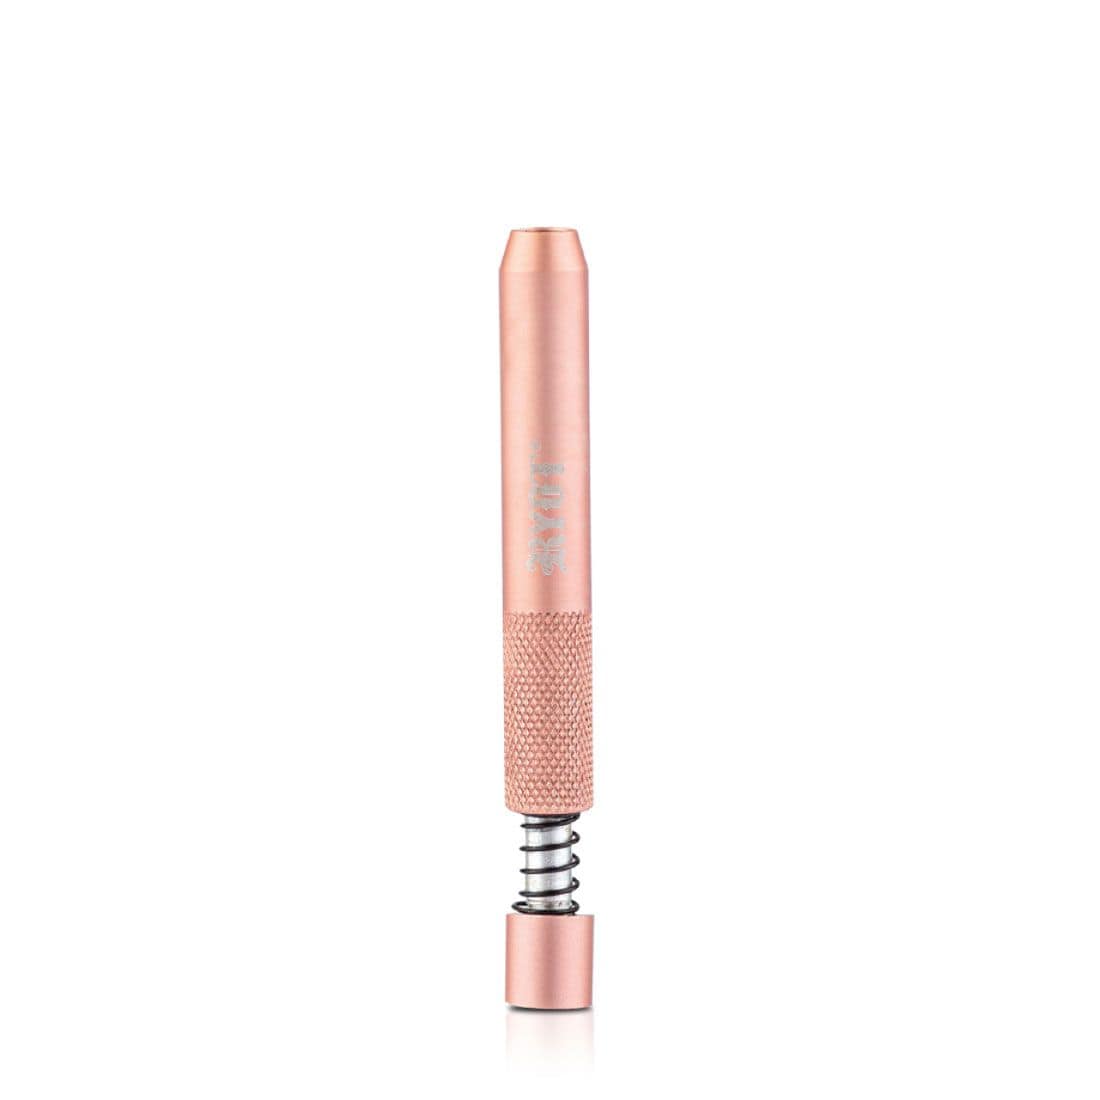 RYOT Gear Accessory Rose Gold RYOT Anodized Spring One Hitter